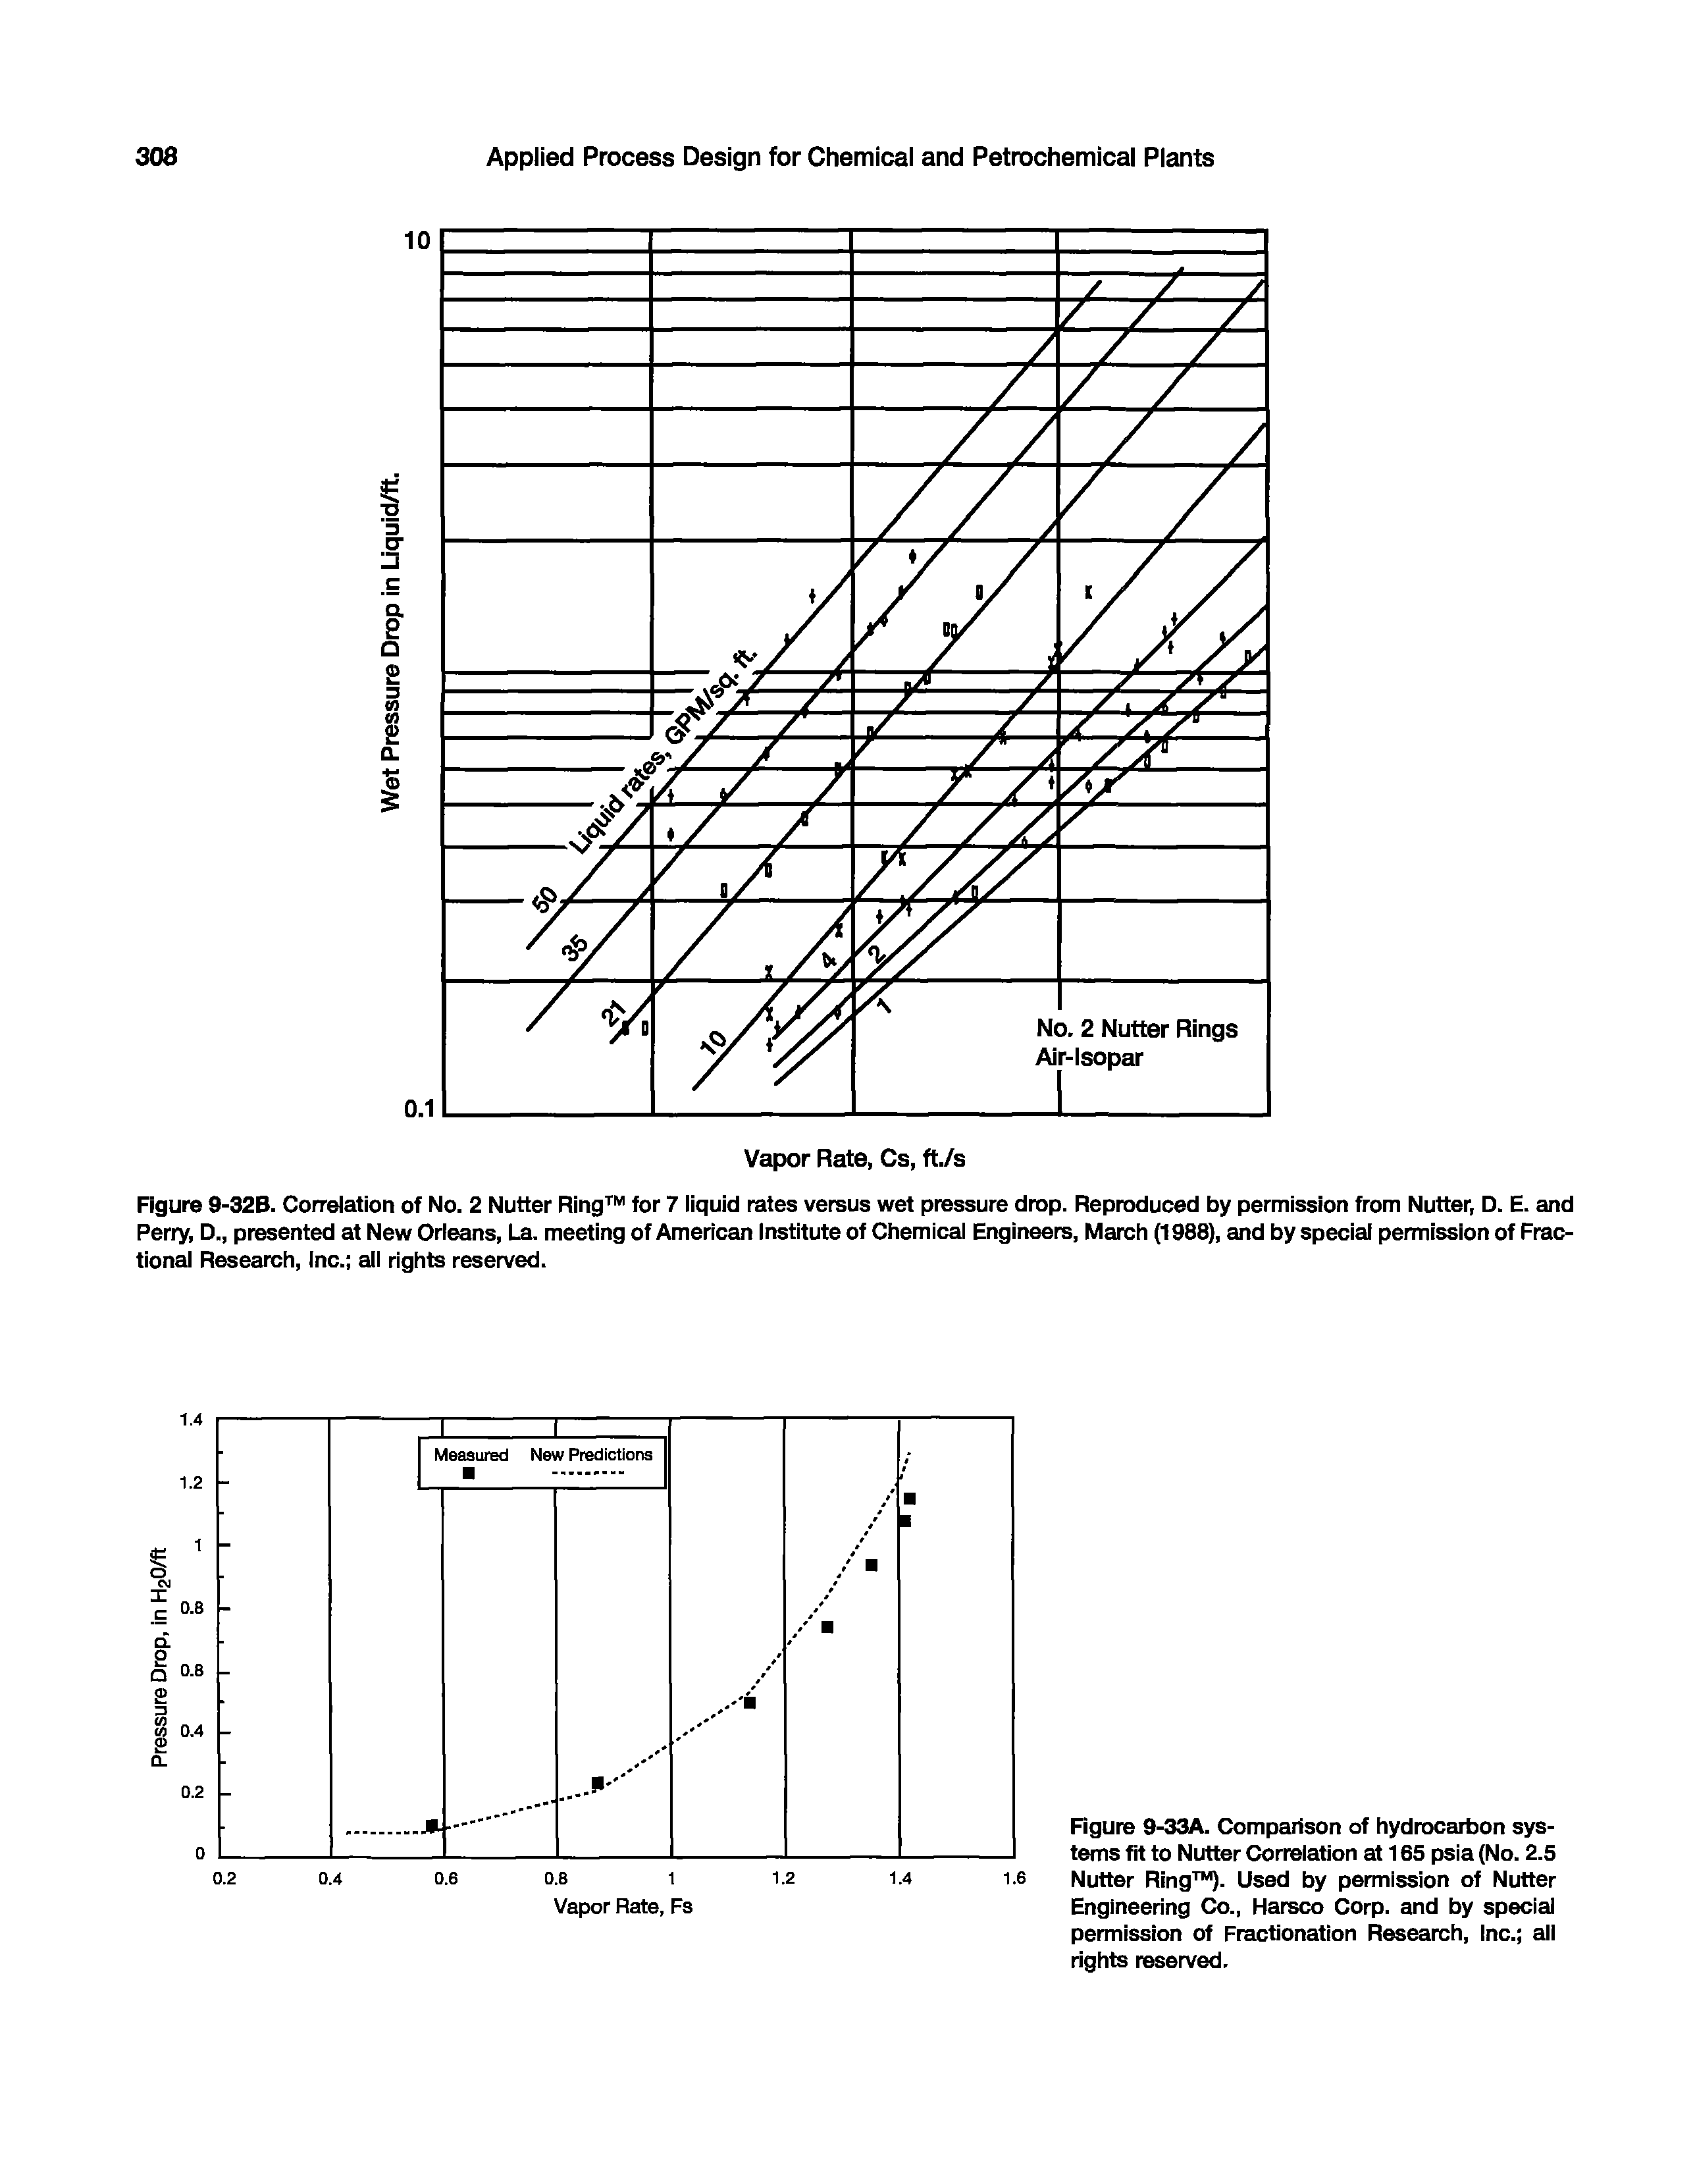 Figure 9-33A. Comparison of hydrocarbon systems fit to Nutter Correlation at 165 psia (No. 2.5 Nutter Ring ). Used by permission of Nutter Engineering Co., Harsco Corp. and by special permission of Fractionation Research, Inc. all rights reserved.